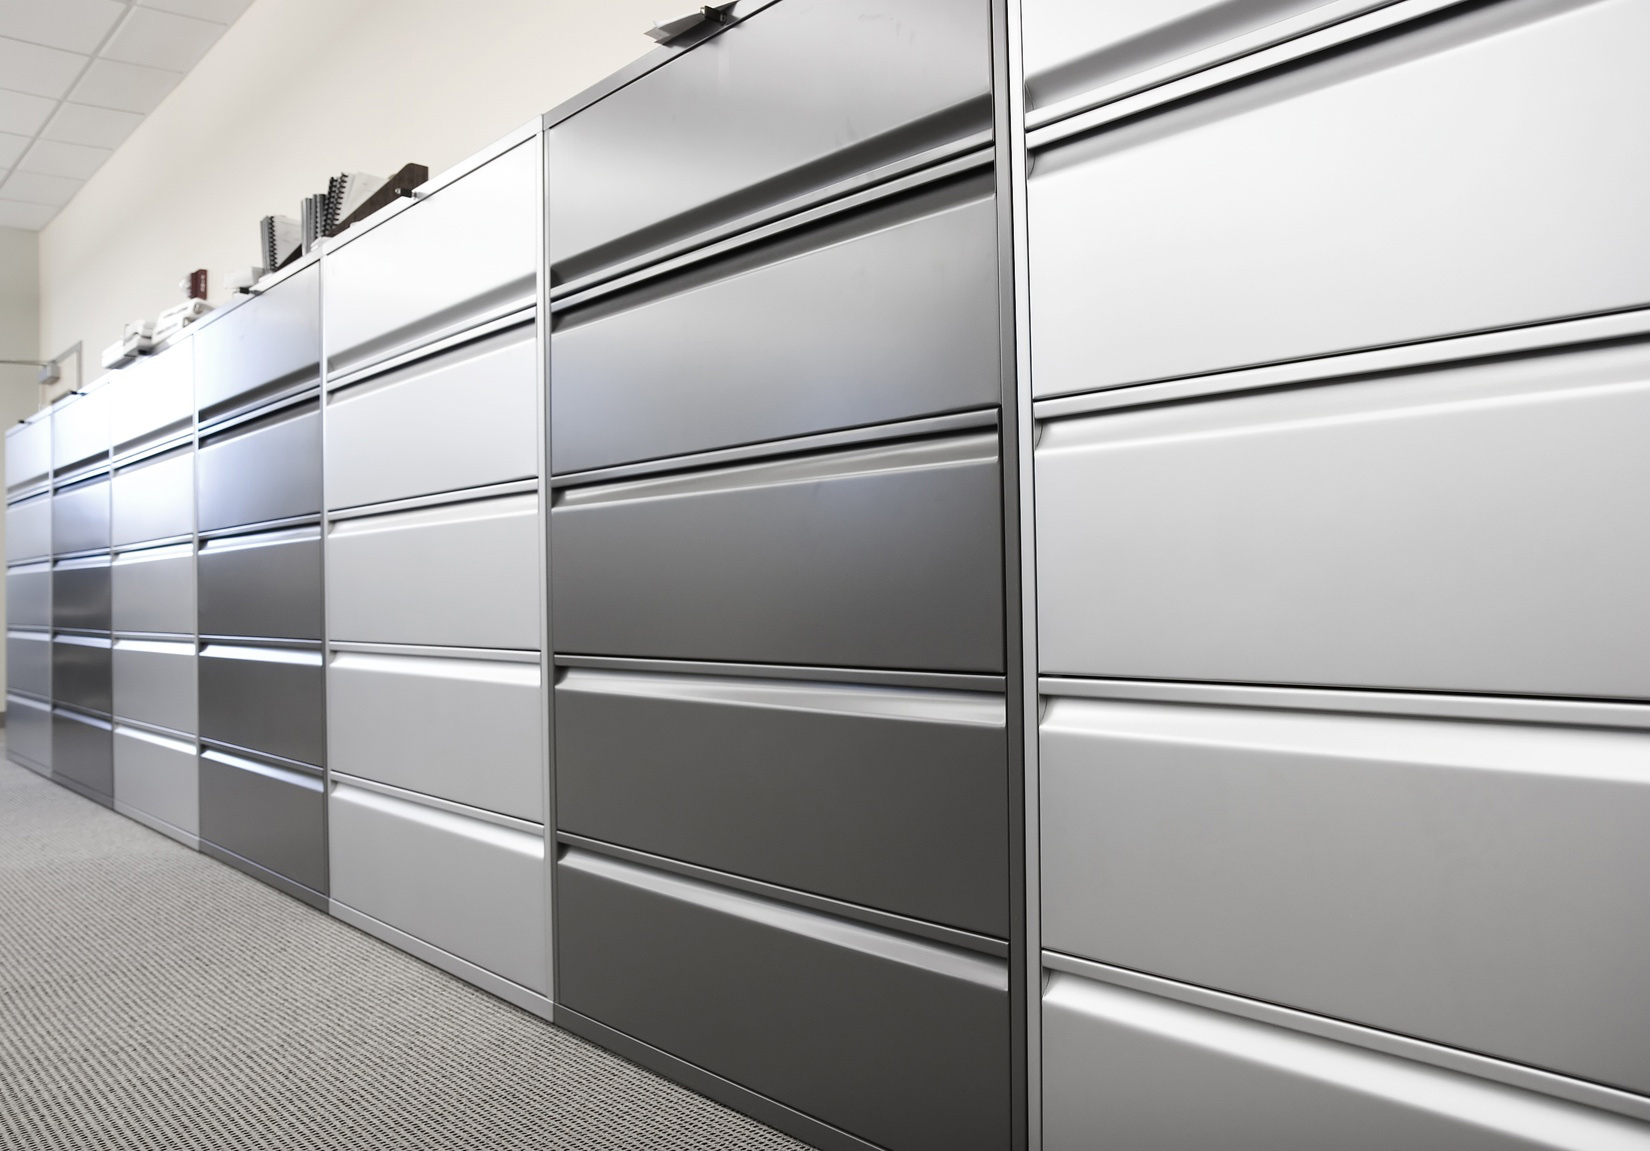 a row of metal filing cabinets in an office